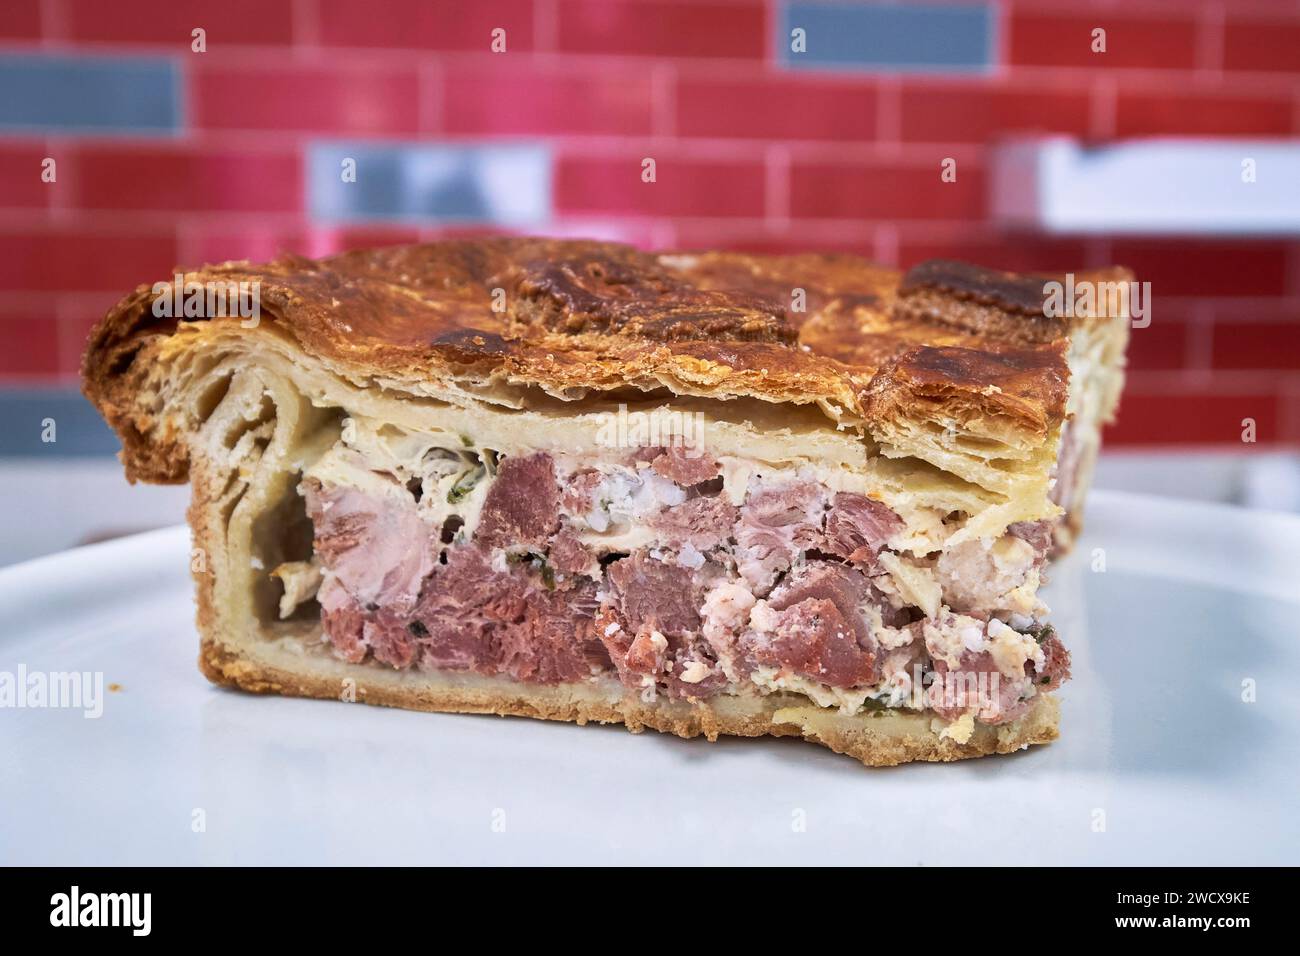 France, Moselle, Ancy Dornot, Maison Saint Clement, the real Lorraine pie with its homemade puff pastry, made from pork marinated in white wine and garnished with migaine (eggs and fresh cream) Stock Photo